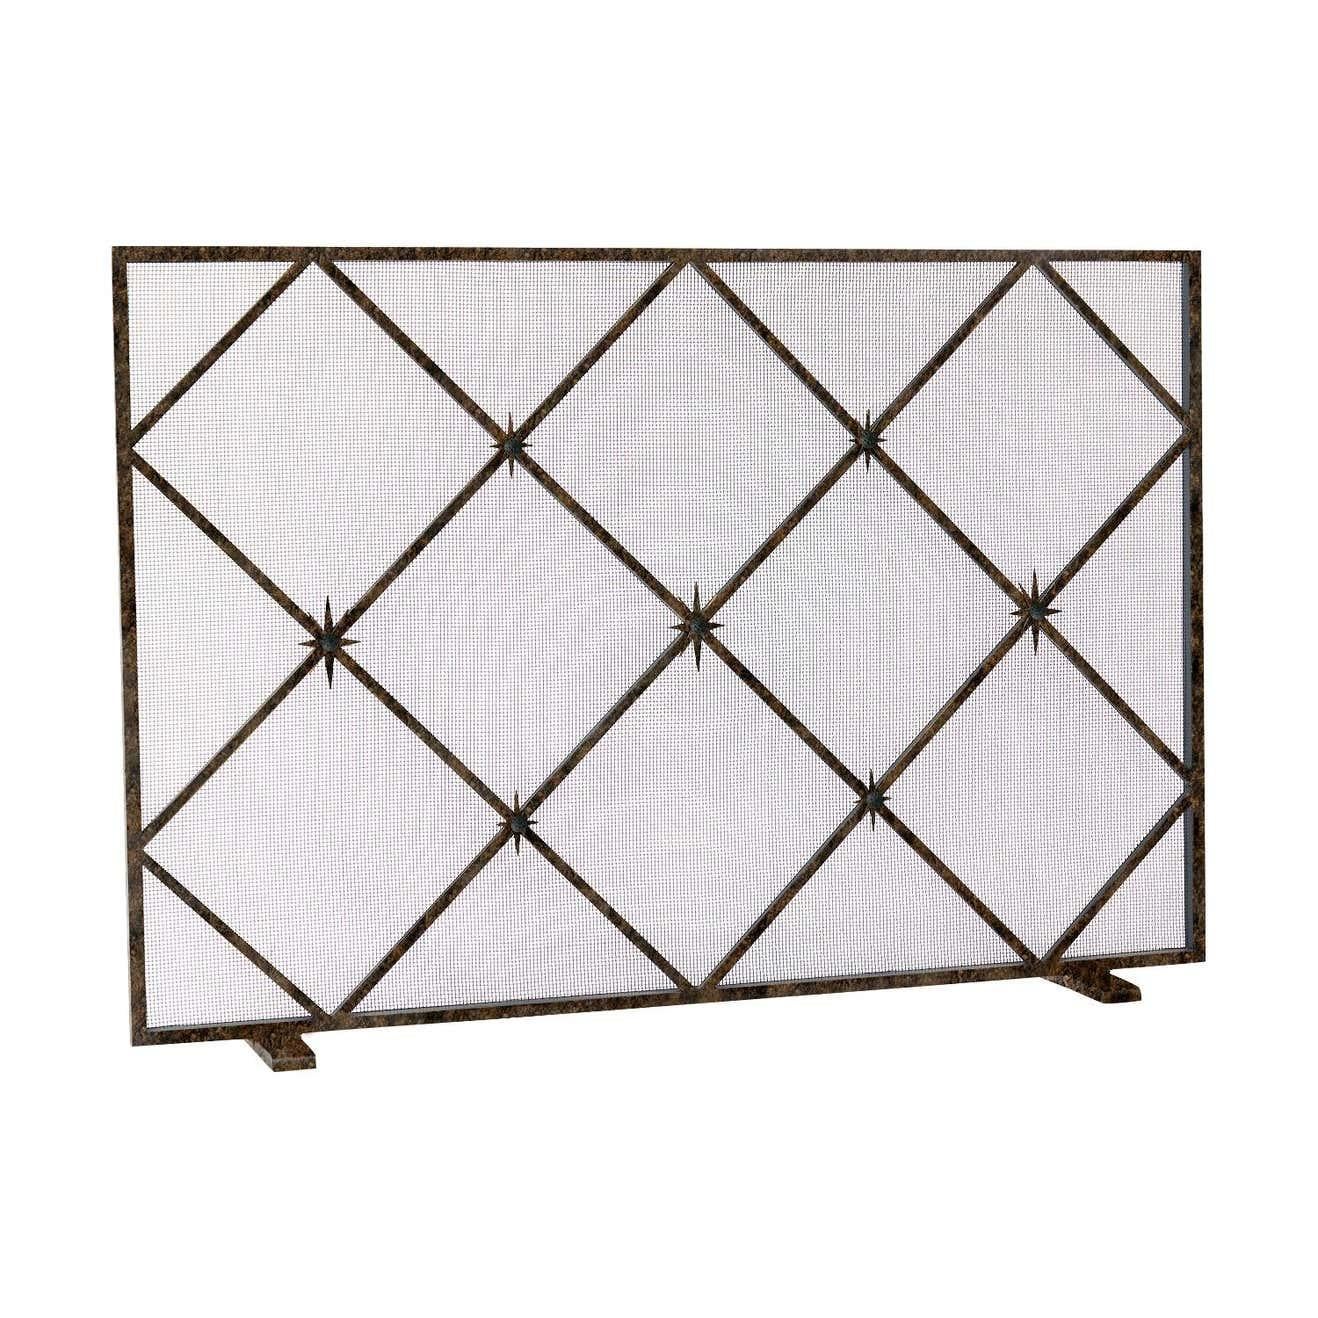 The Celeste Fireplace Screen's hand-forged star points and colorful, textural ceramic spheres evoke the beauty of a clear night sky. The solid iron frame, crossbar motif, and cheerful decorative elements are skillfully built by American artisans.